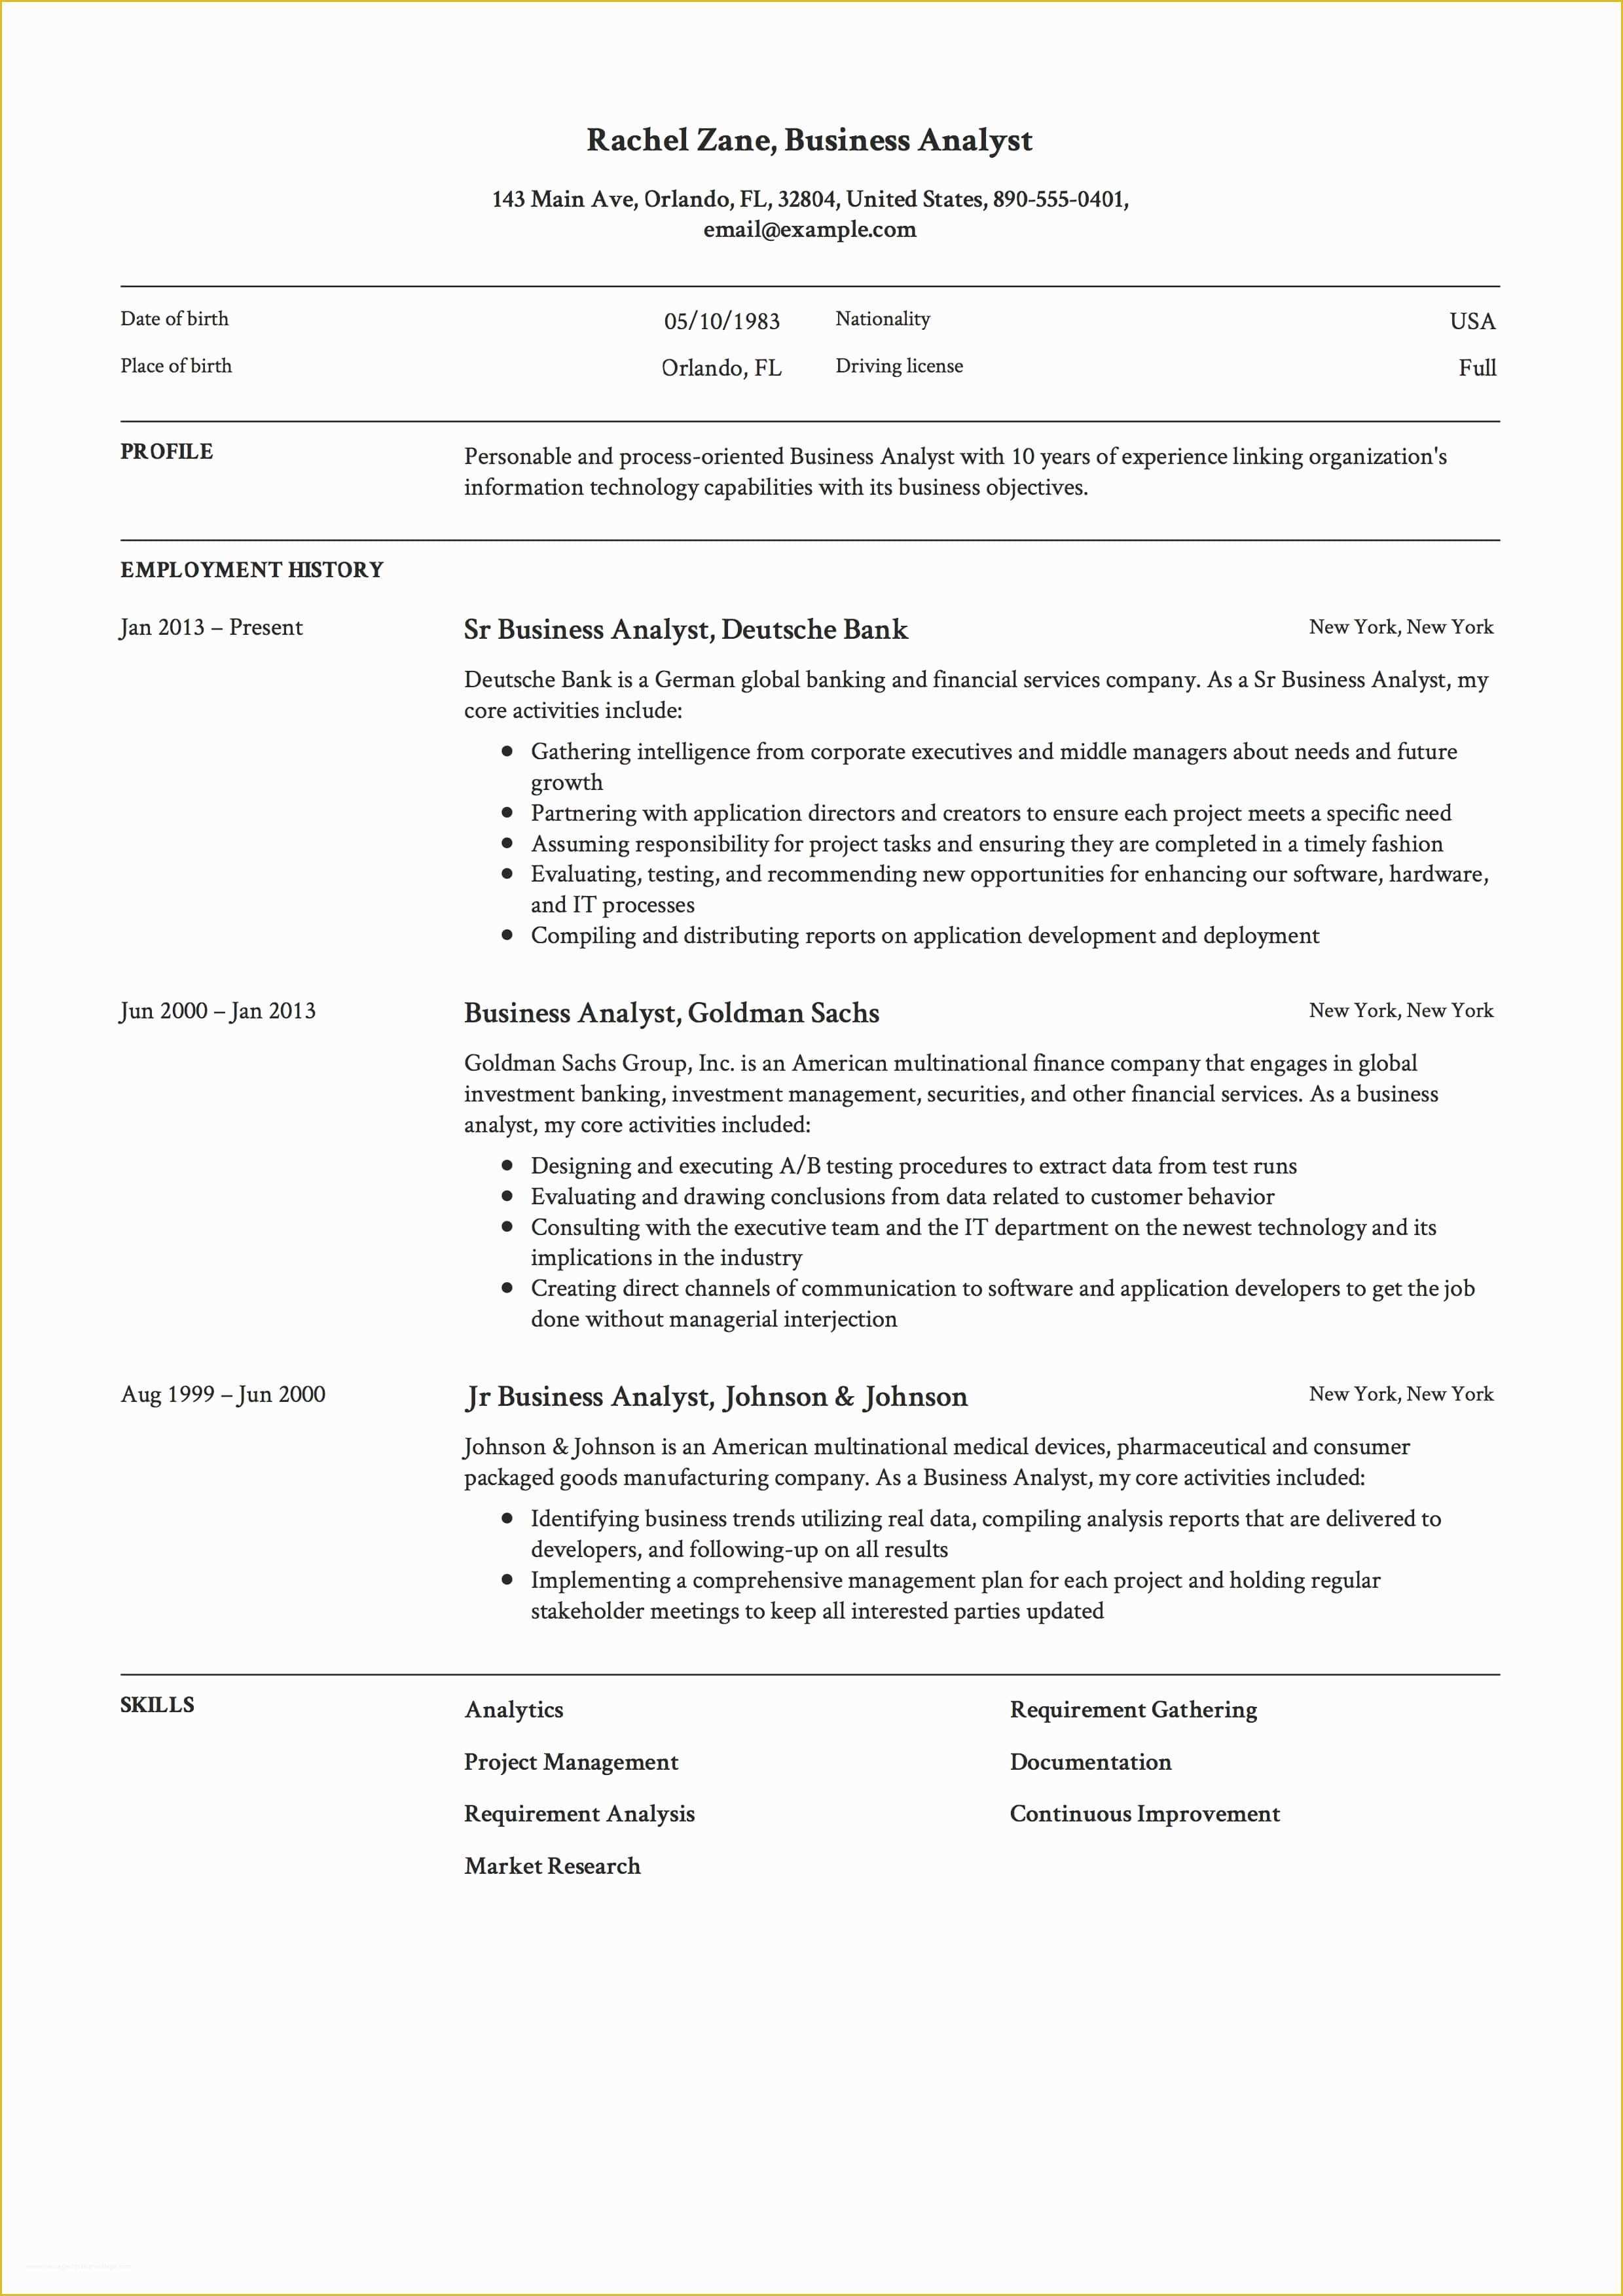 Resume Templates 2018 Free Of Full Guide Project Manager Resume & 12 Resume Samples